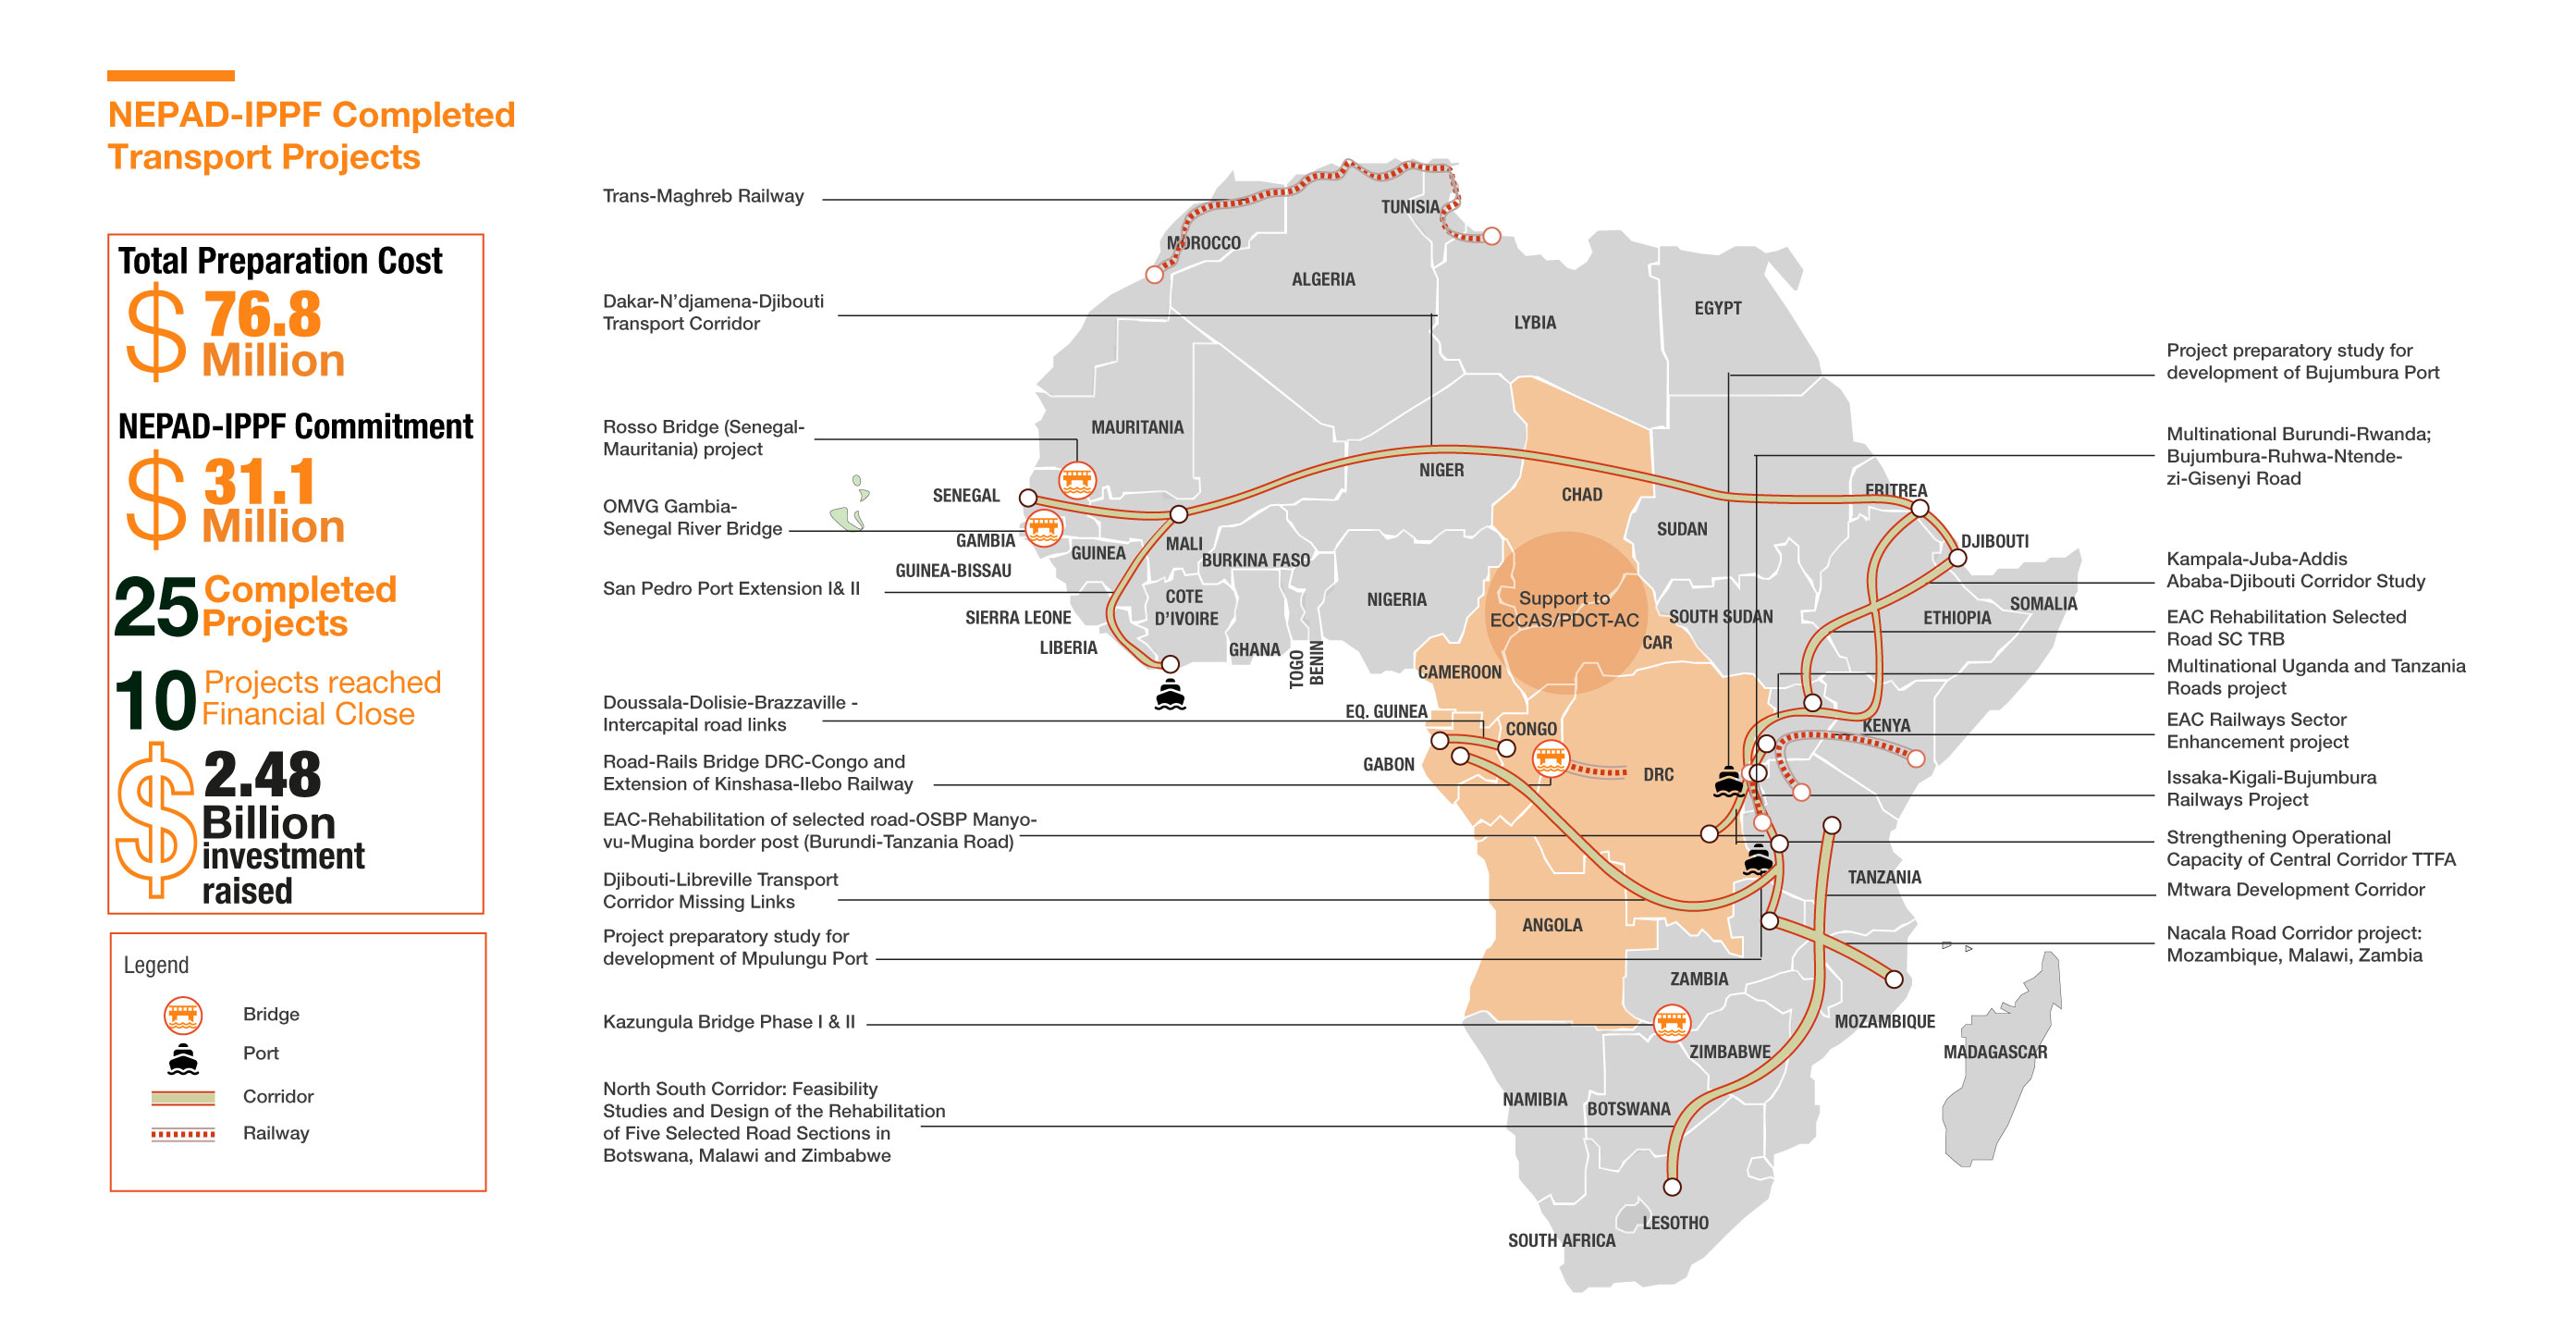 NEPAD-IPPF Completed Transport Projects